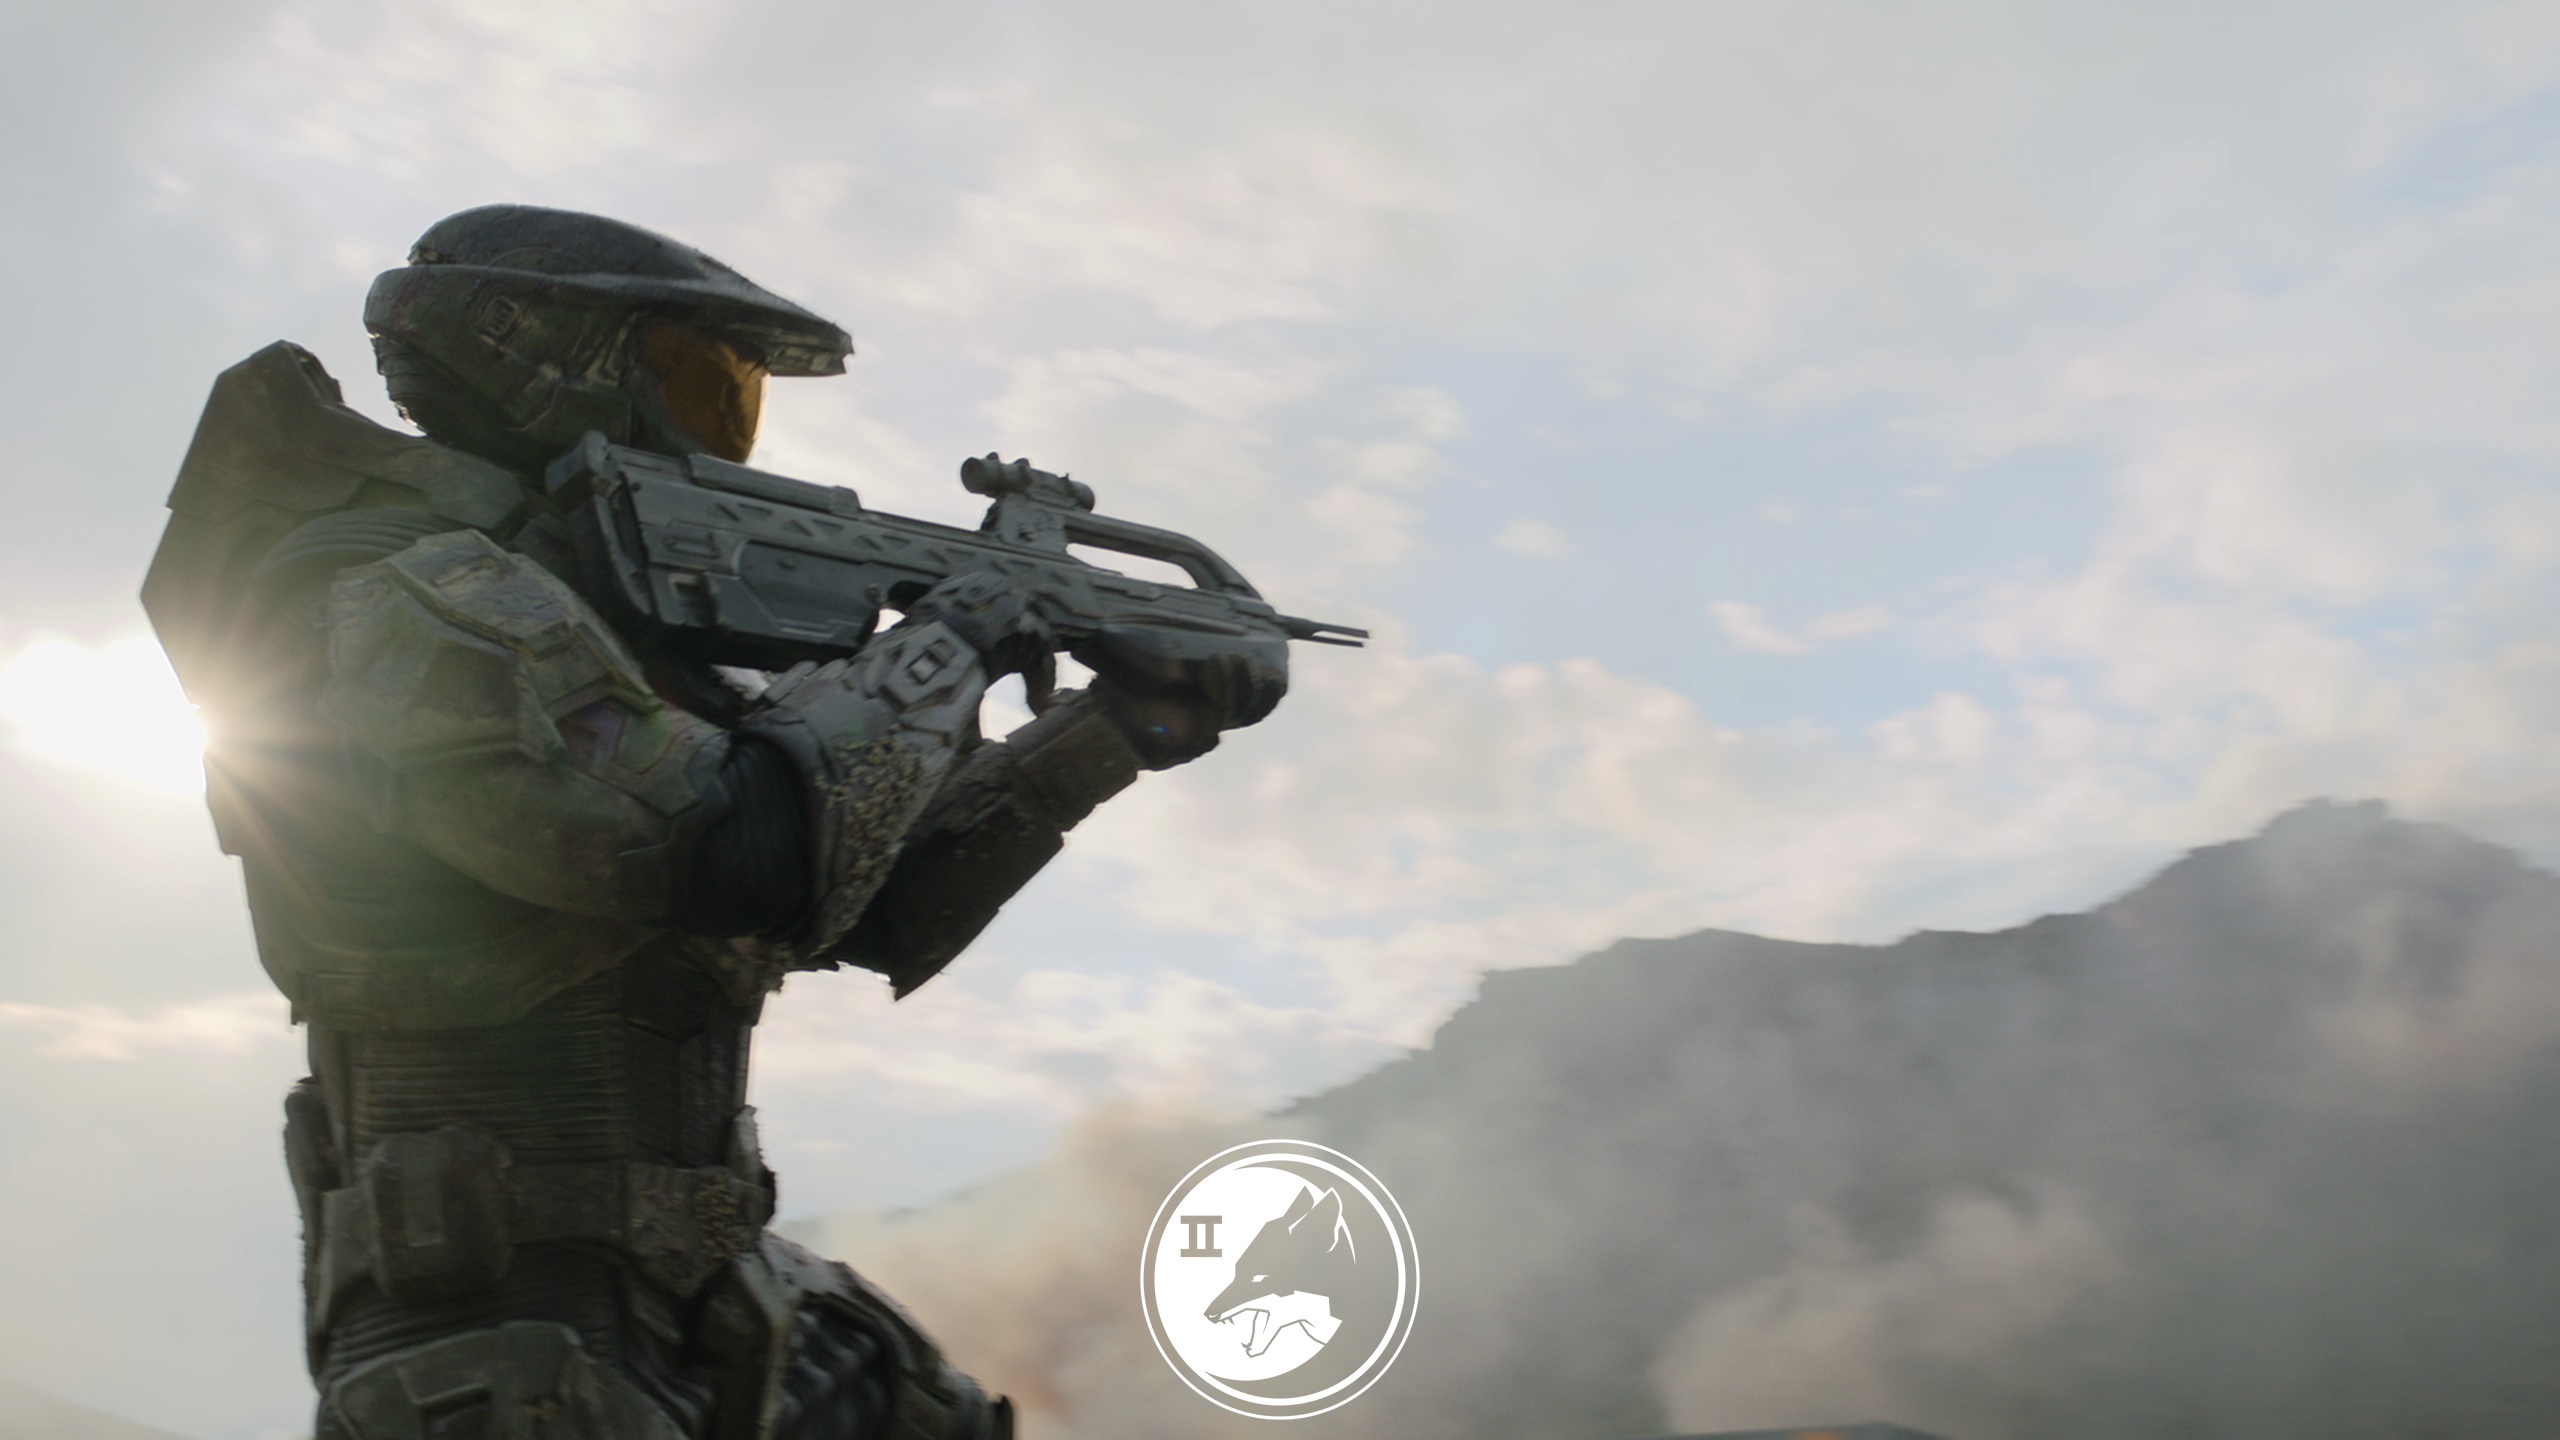 Halo TV series reveals Cortana, Master Chief's backstory in trailer